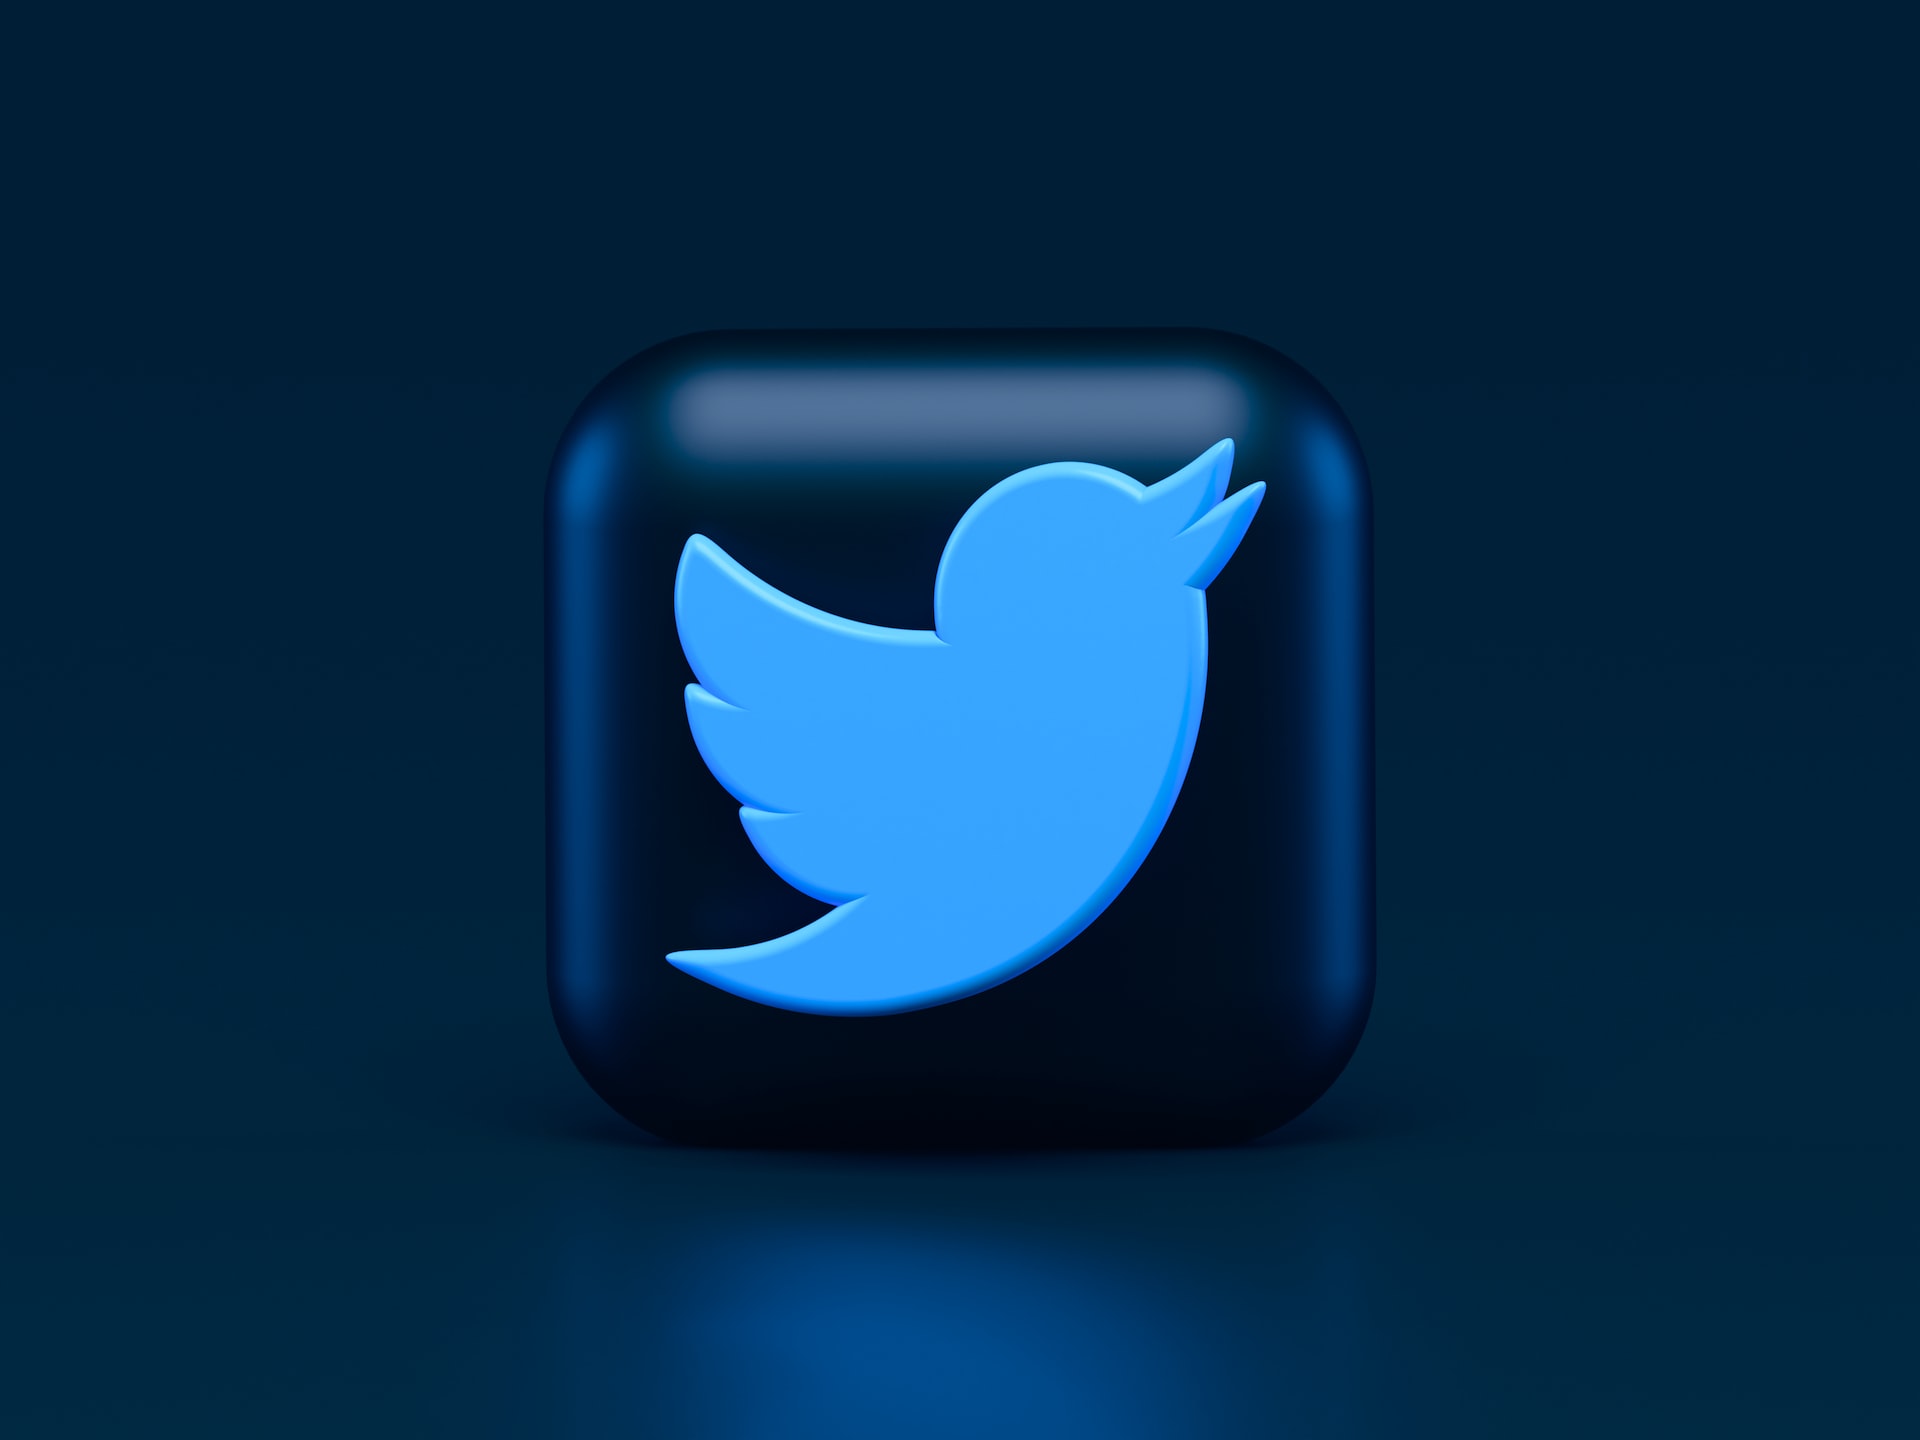 Geek insider, geekinsider, geekinsider. Com,, 3 tips for using twitter video, how to